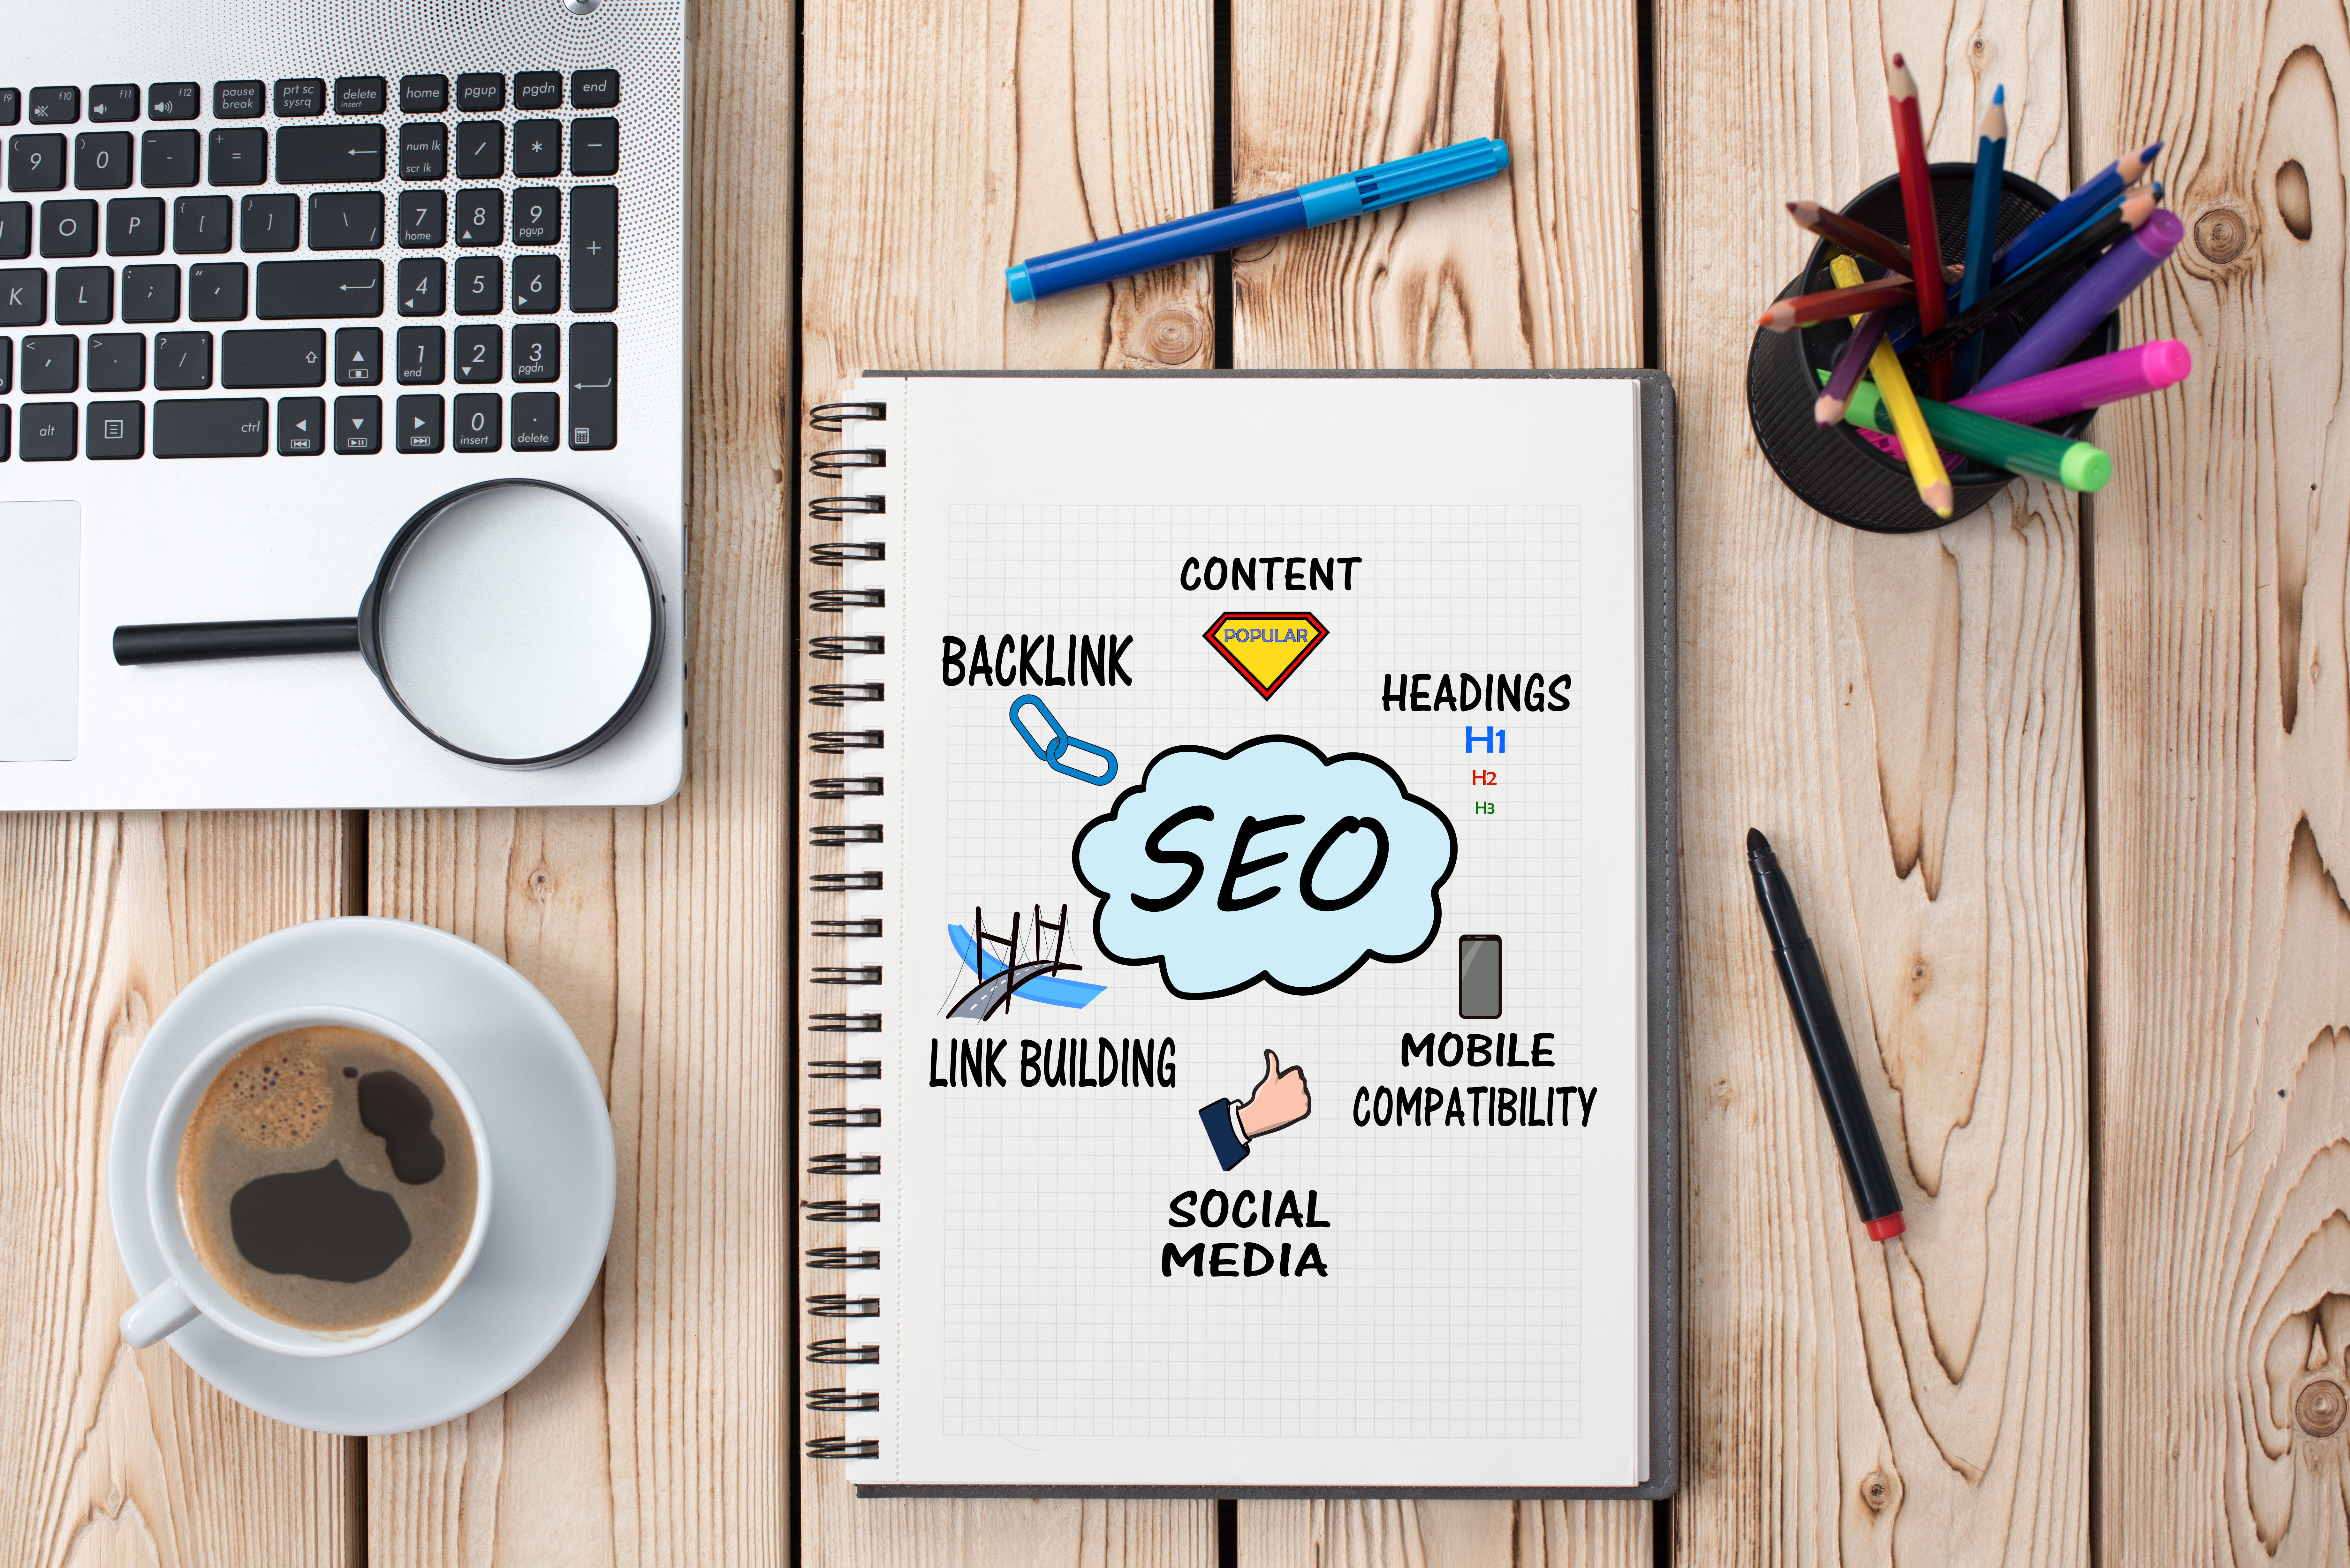 SEO for Search Engine Optimization doodled on a page promoting content, headings, mobile compatability, social media, and link building.